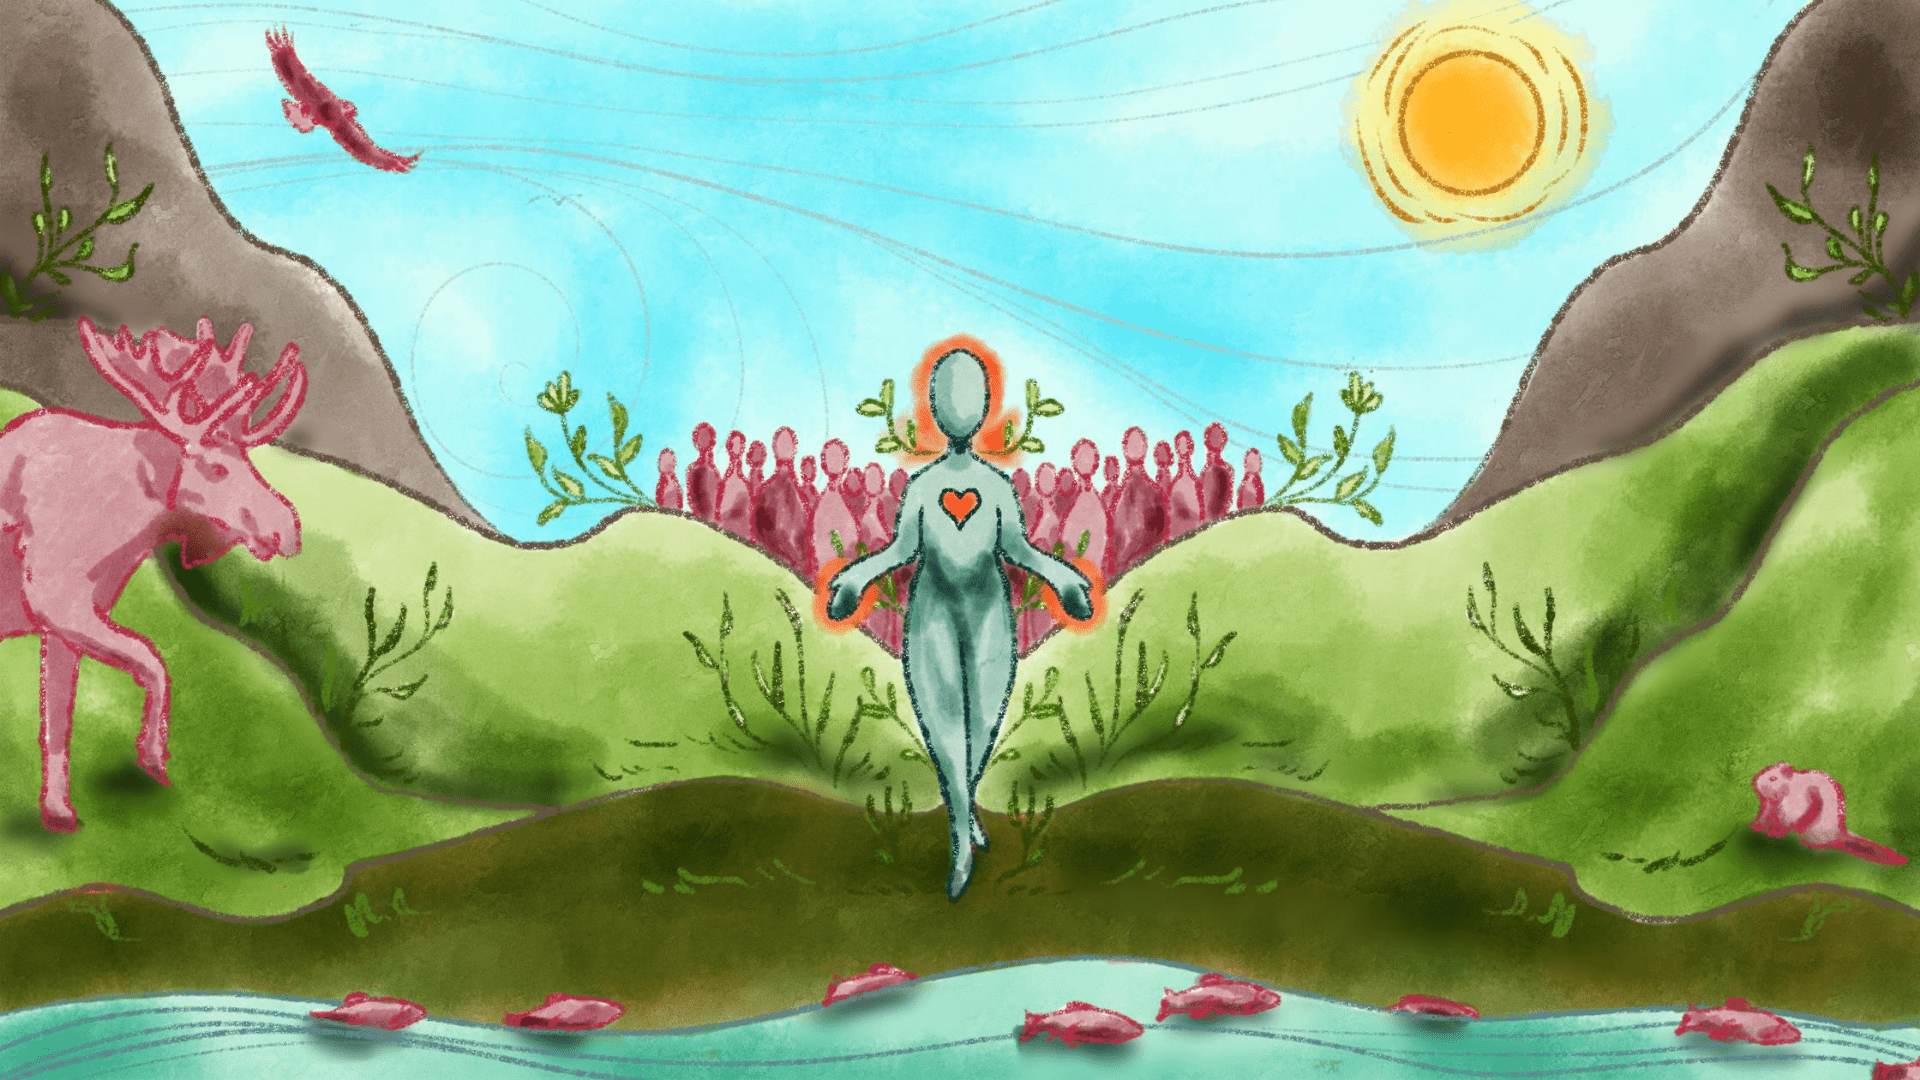 An illustration of a person with their head, heart, and hands highlighted standing on the land in harmony with nature and animals.